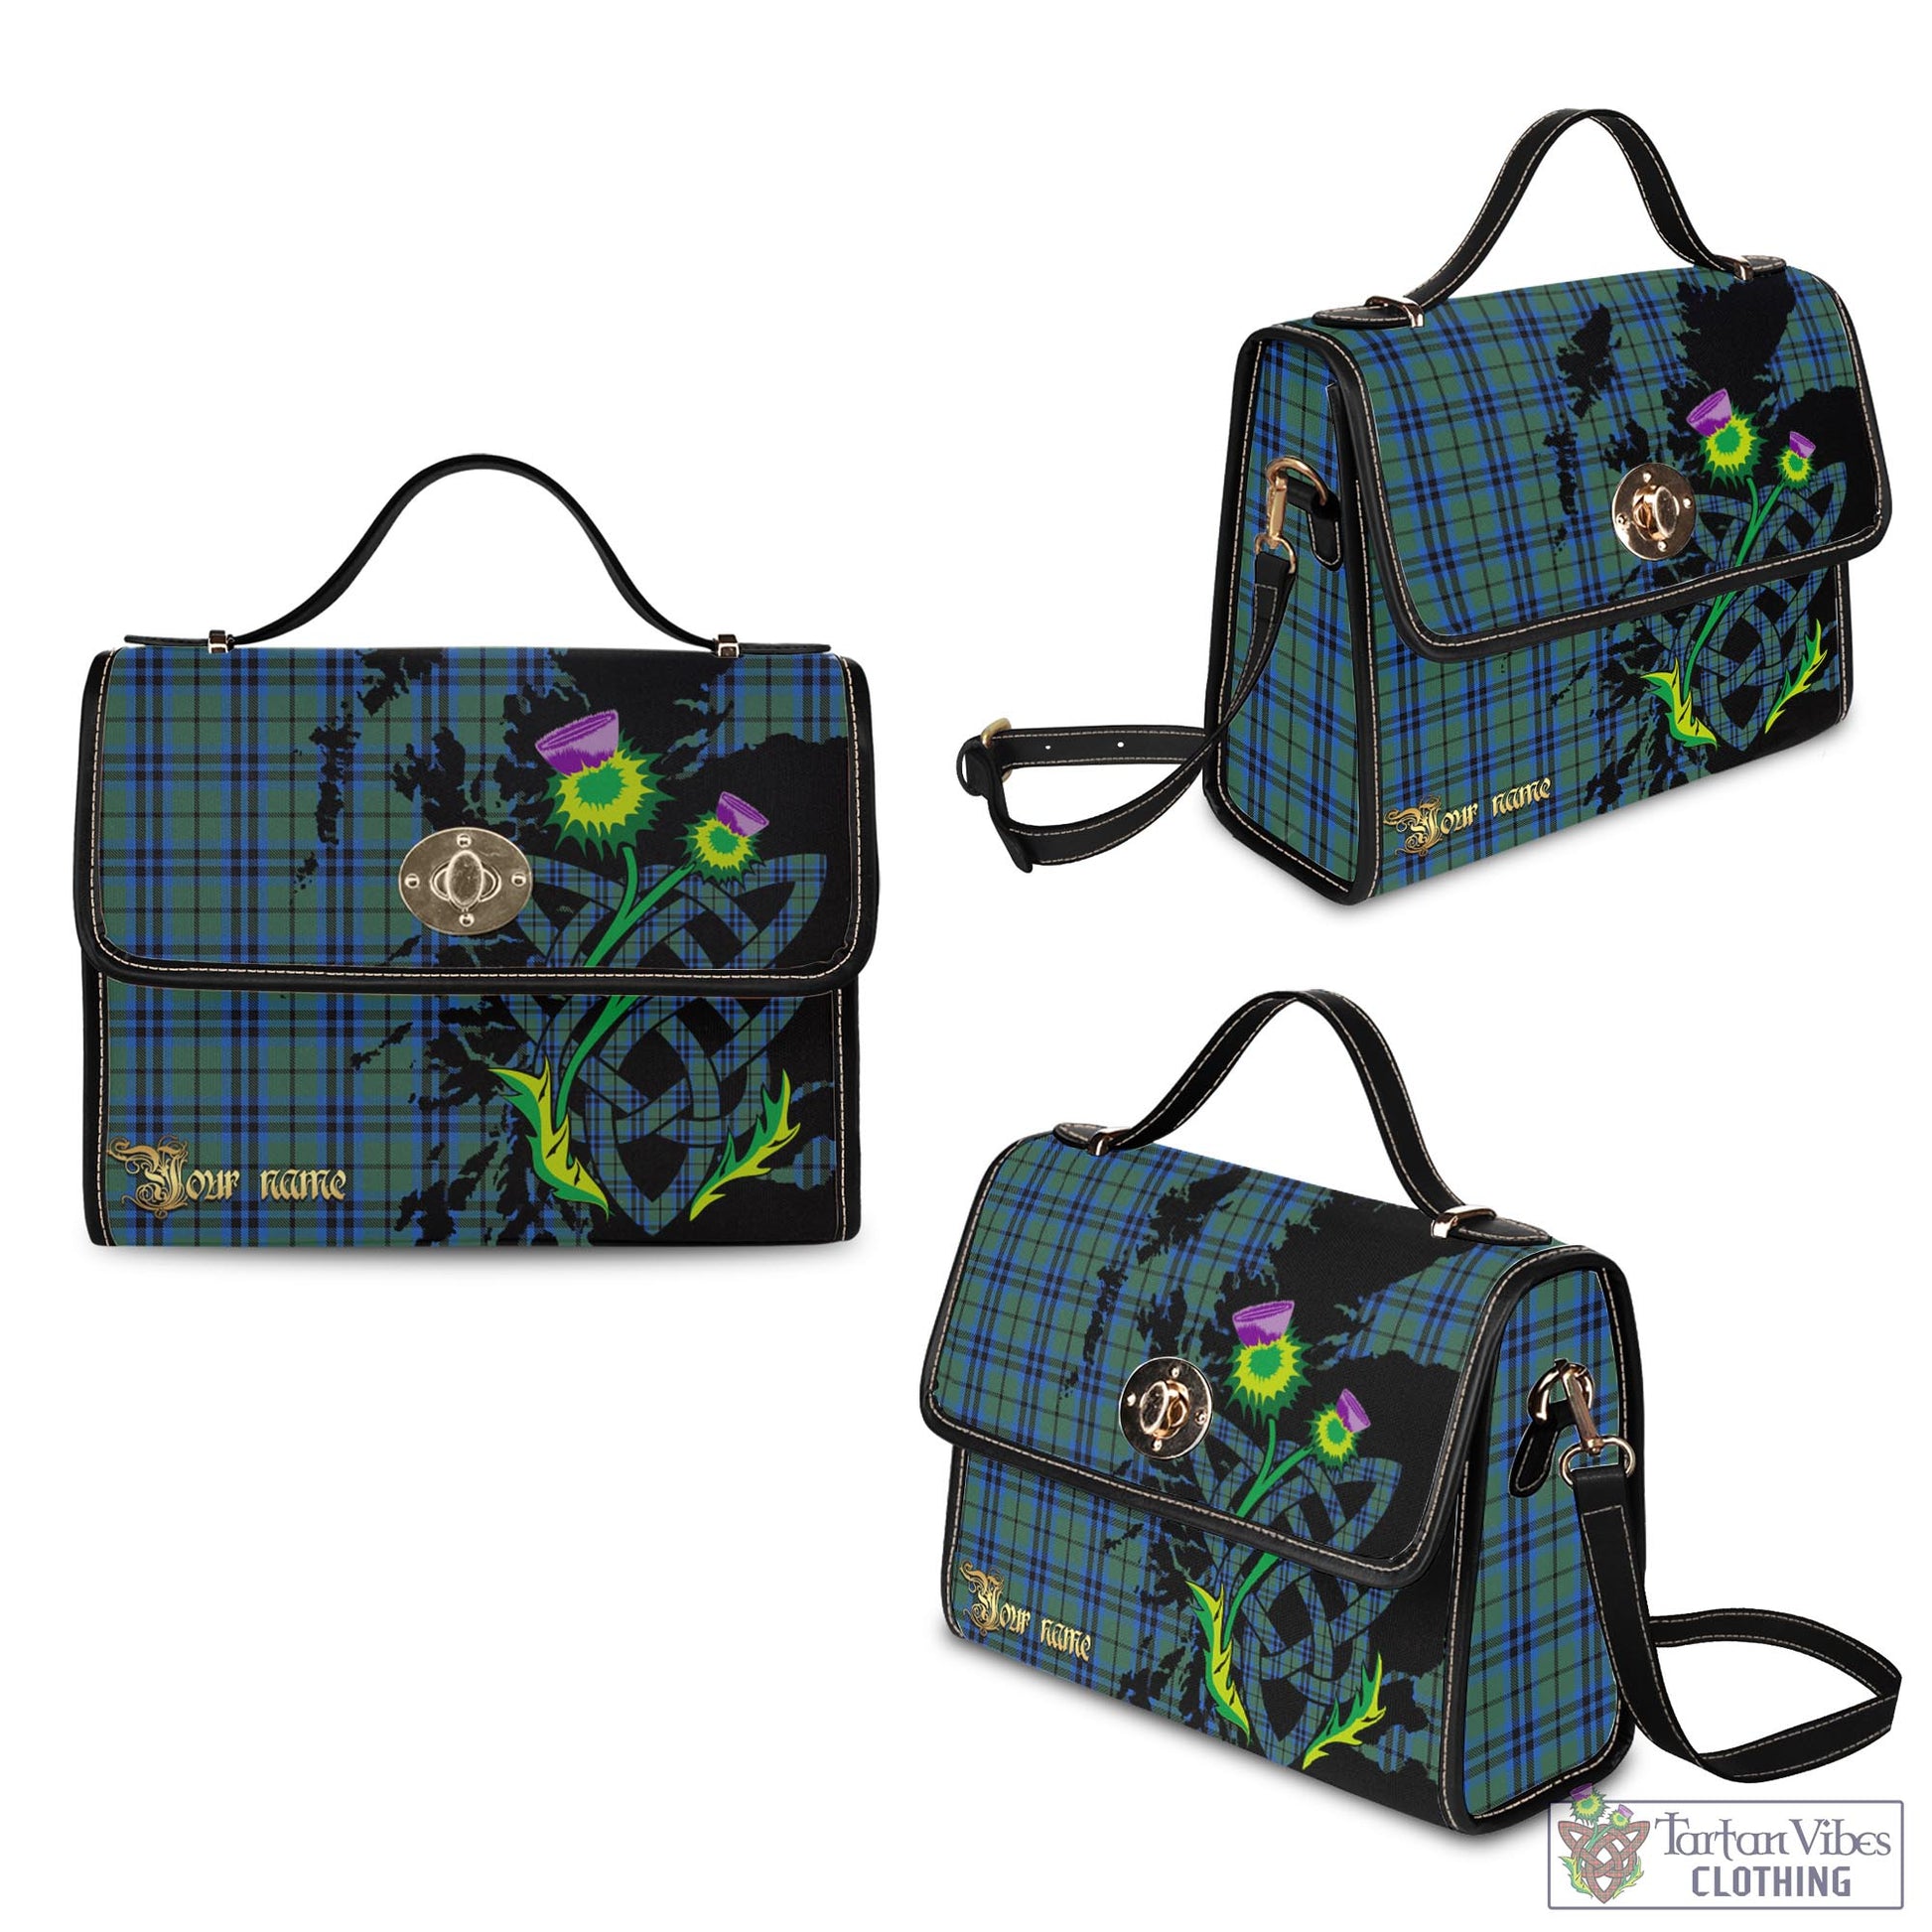 Tartan Vibes Clothing Marshall Tartan Waterproof Canvas Bag with Scotland Map and Thistle Celtic Accents